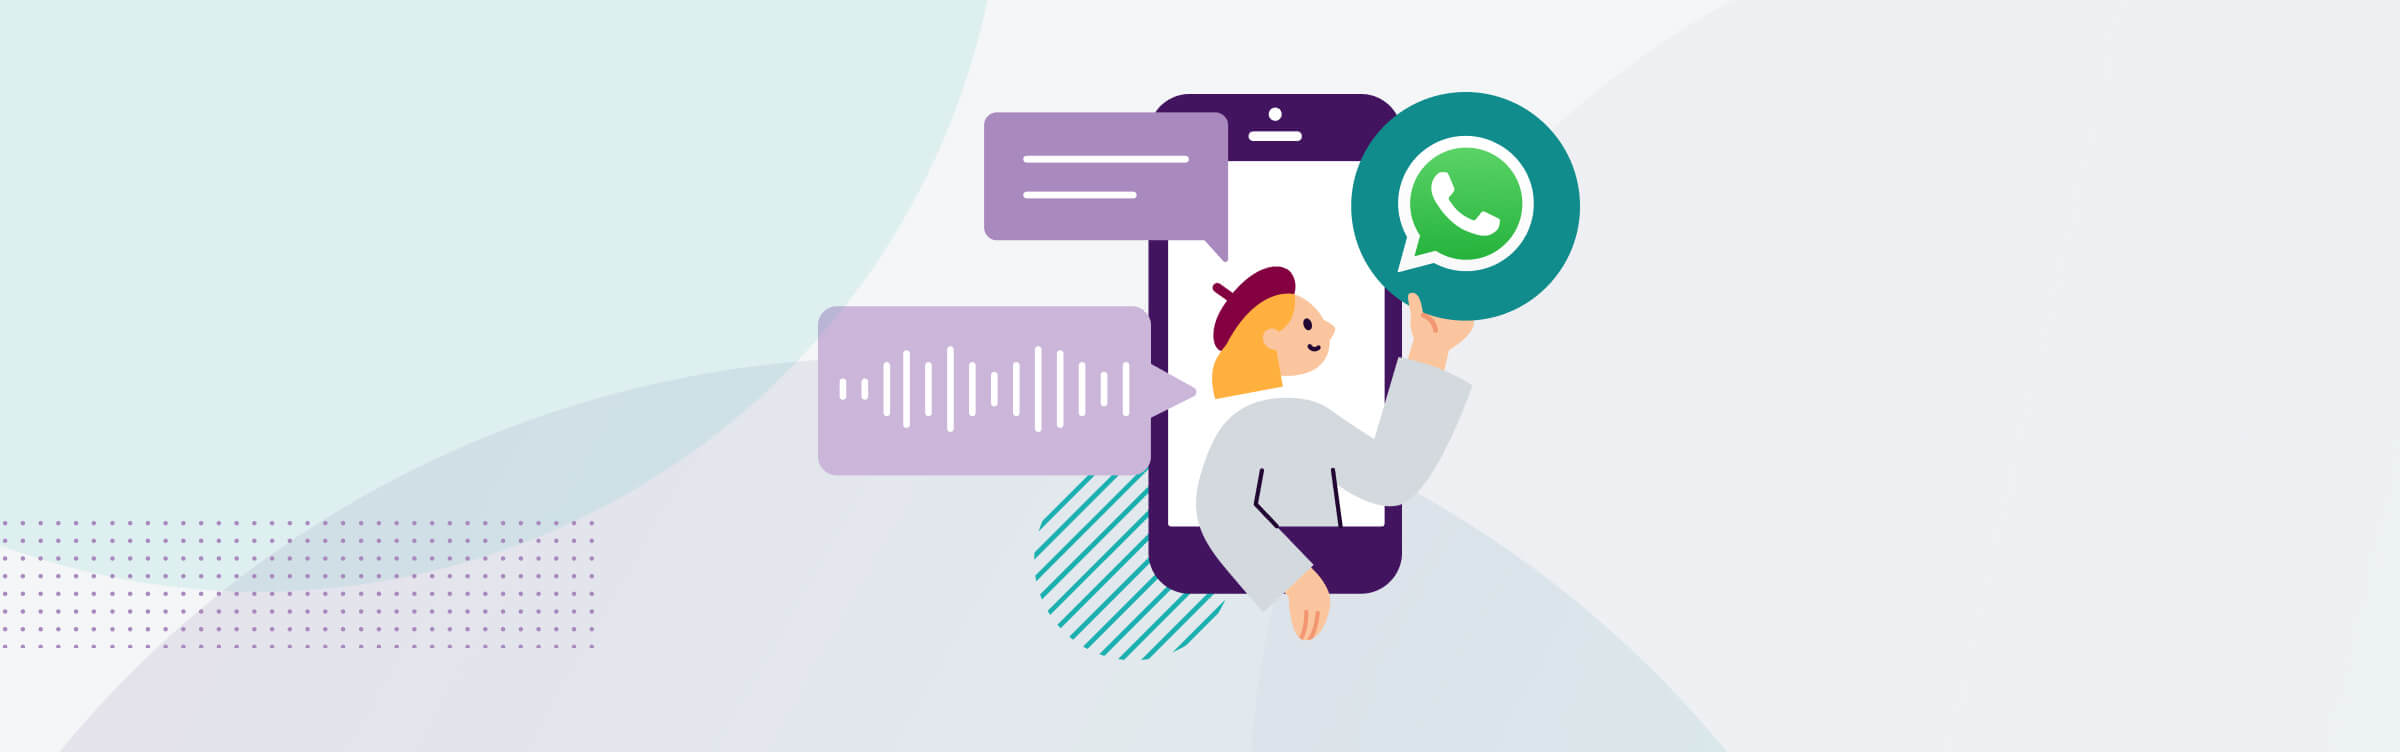 Image of a person, a phone, a message and the WhatsApp logo